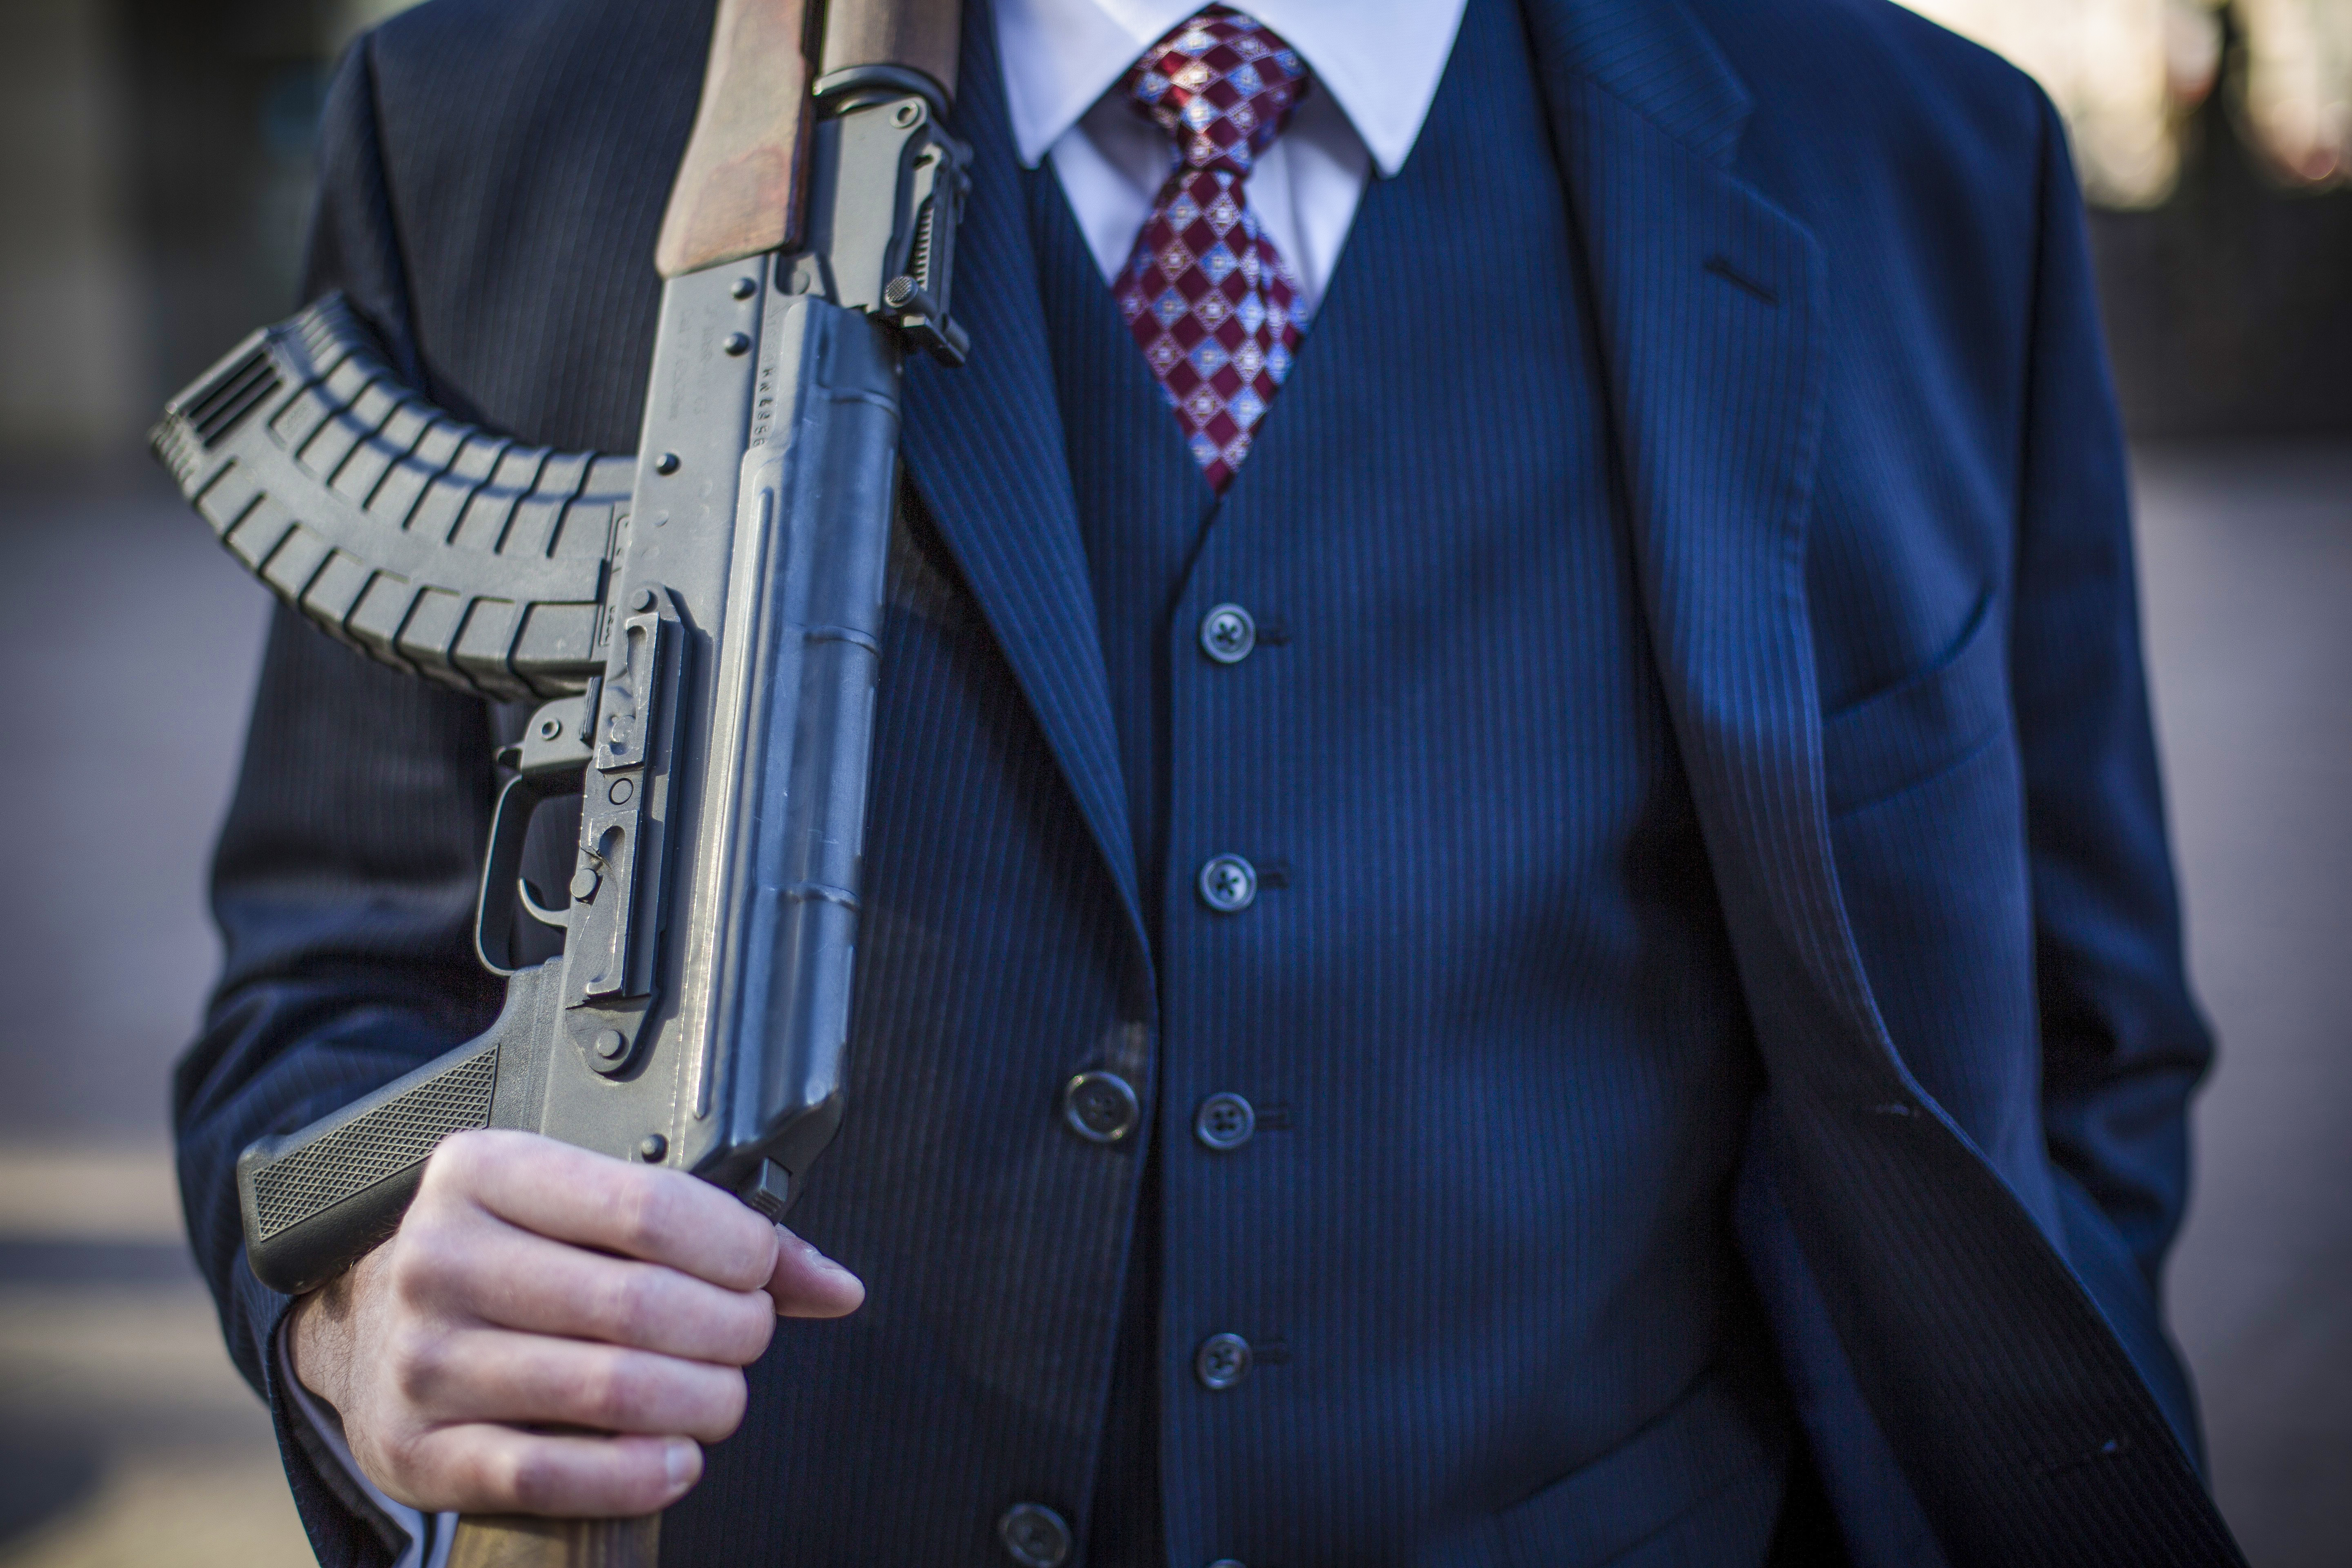 A gun-rights supporter shoulders his AK-47 during a protest.